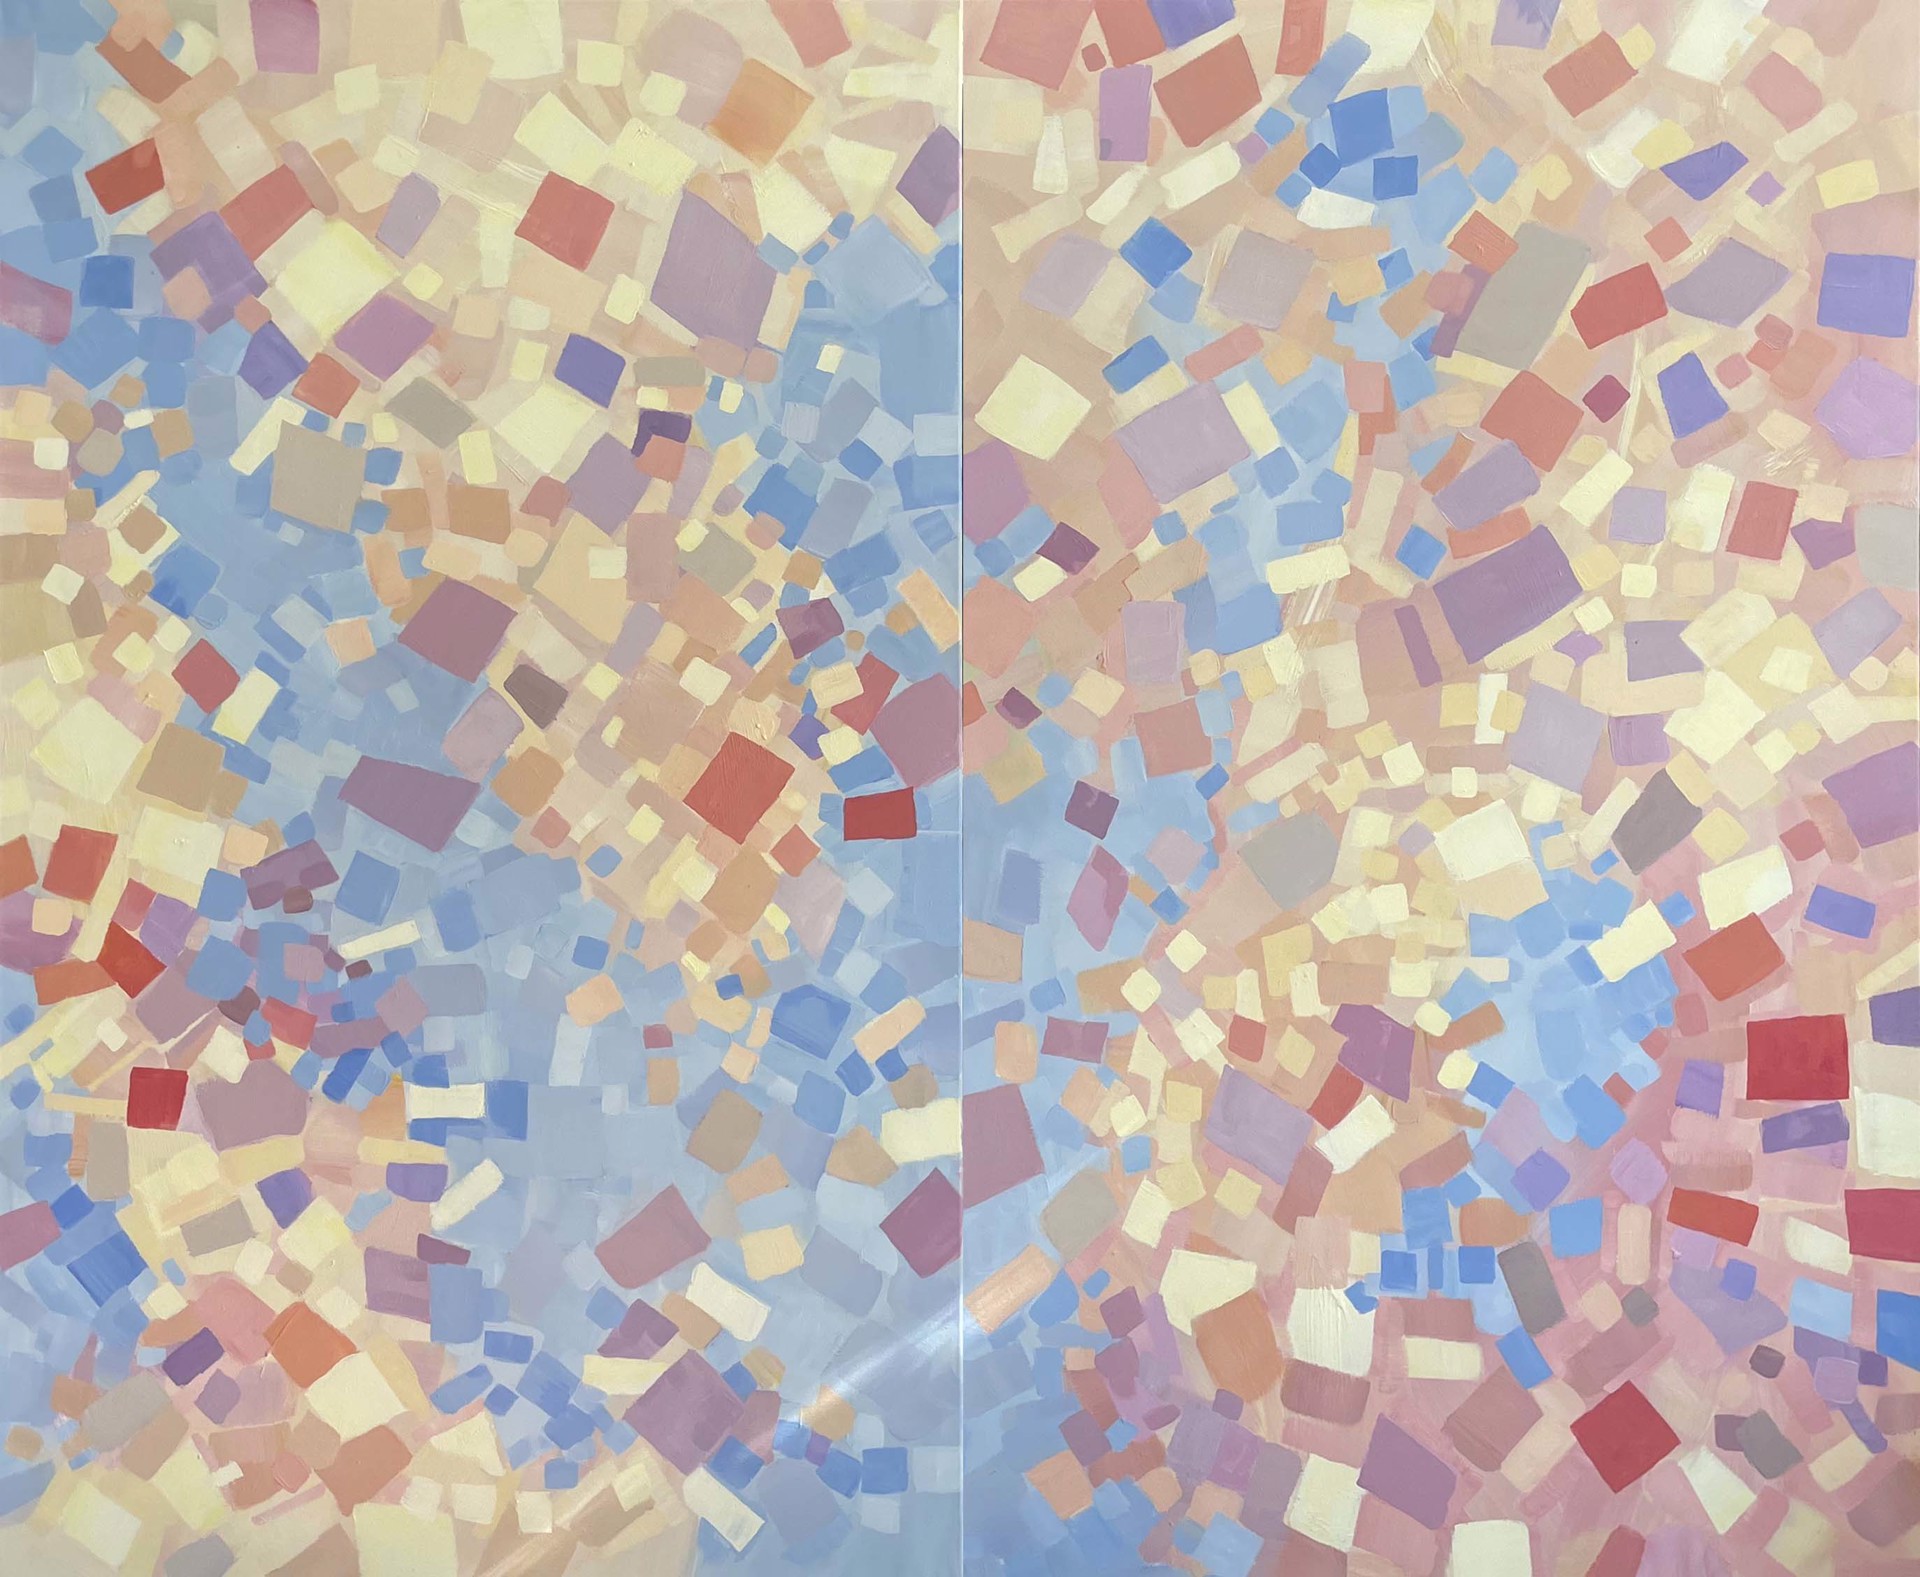 The small particles of World, diptych by Anna Miller